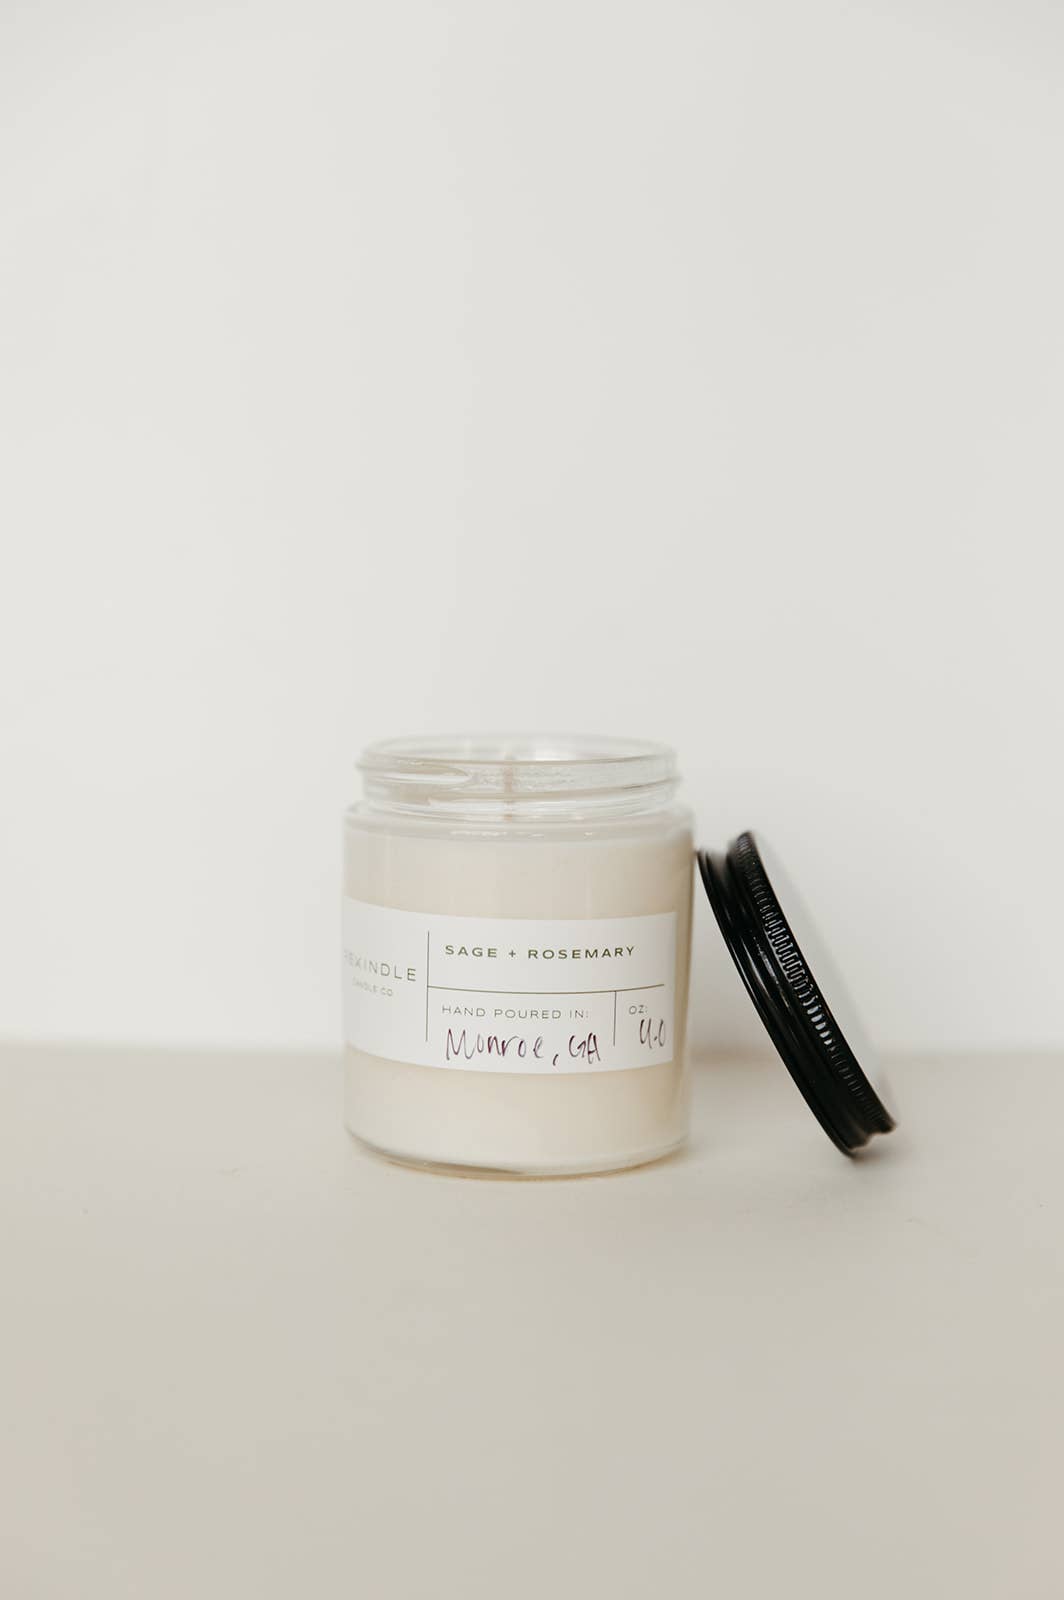 Sage + Rosemary Cotton Wick Soy Candle